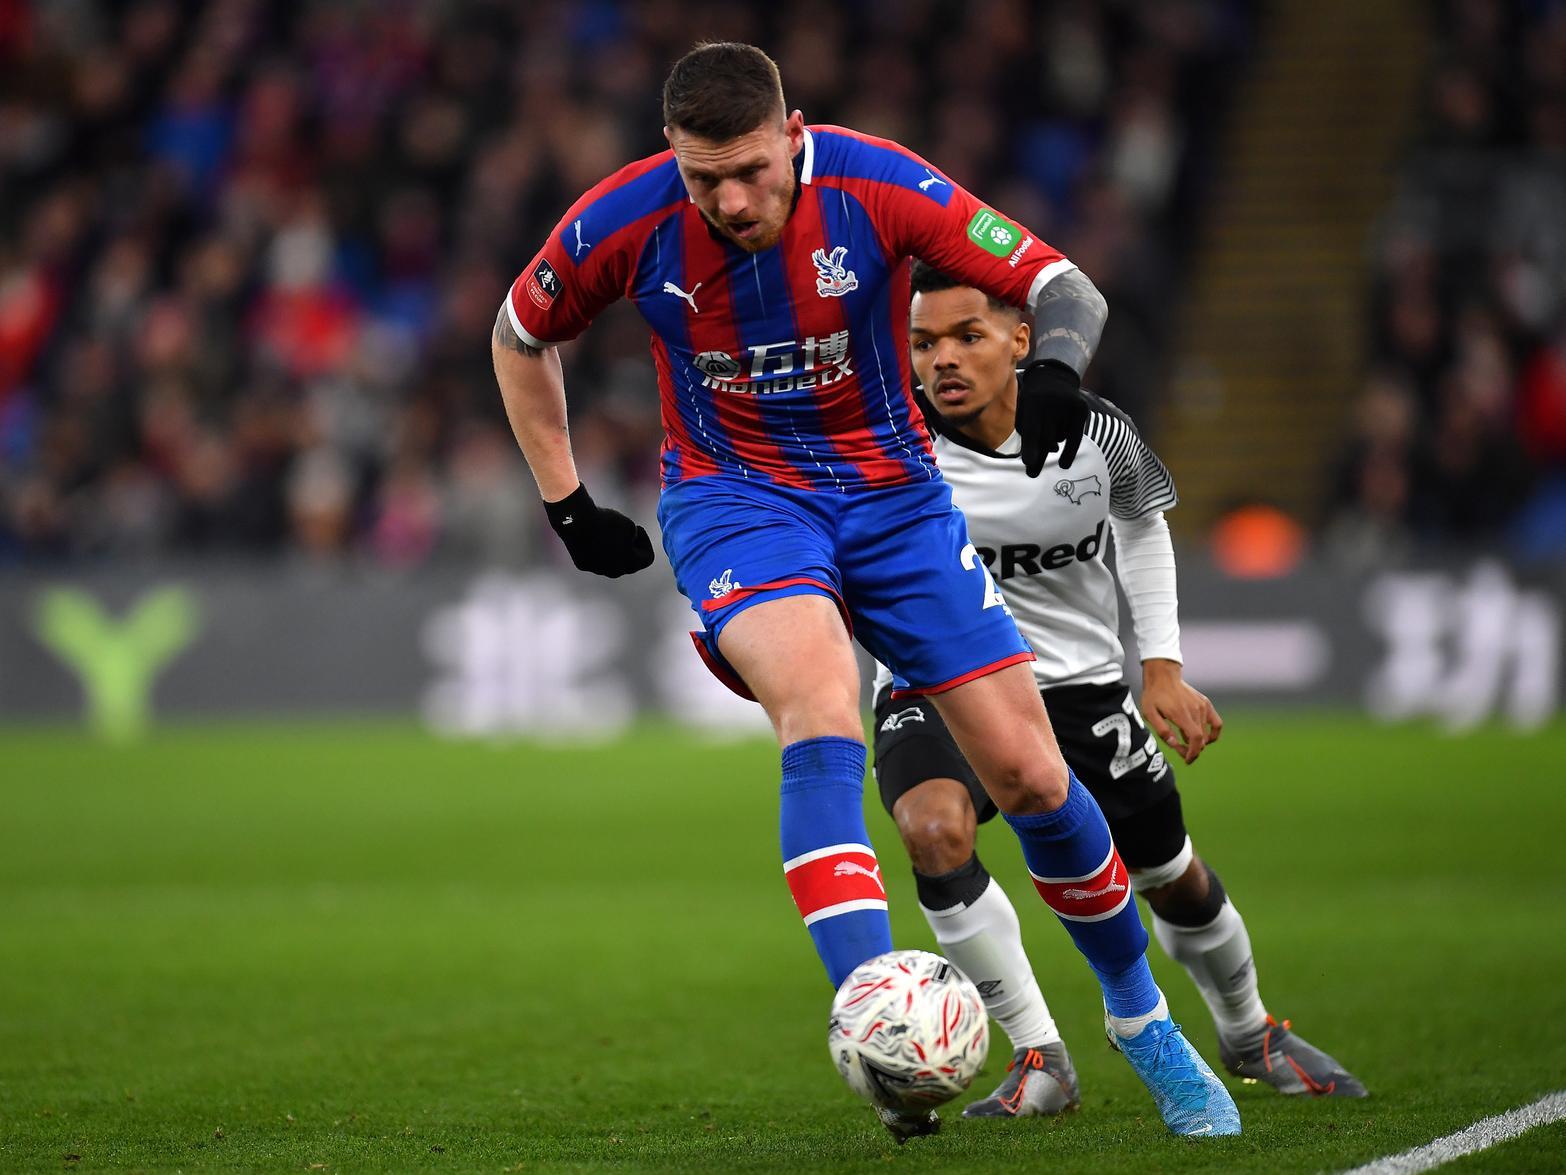 Sheffield Wednesday's early attempts to sign Crystal Palace striker Connor Wickham on loan are believed to have been rebuffed, with the Eagles requiring a more substantial wage contribution to sanction a deal. (The Sun)